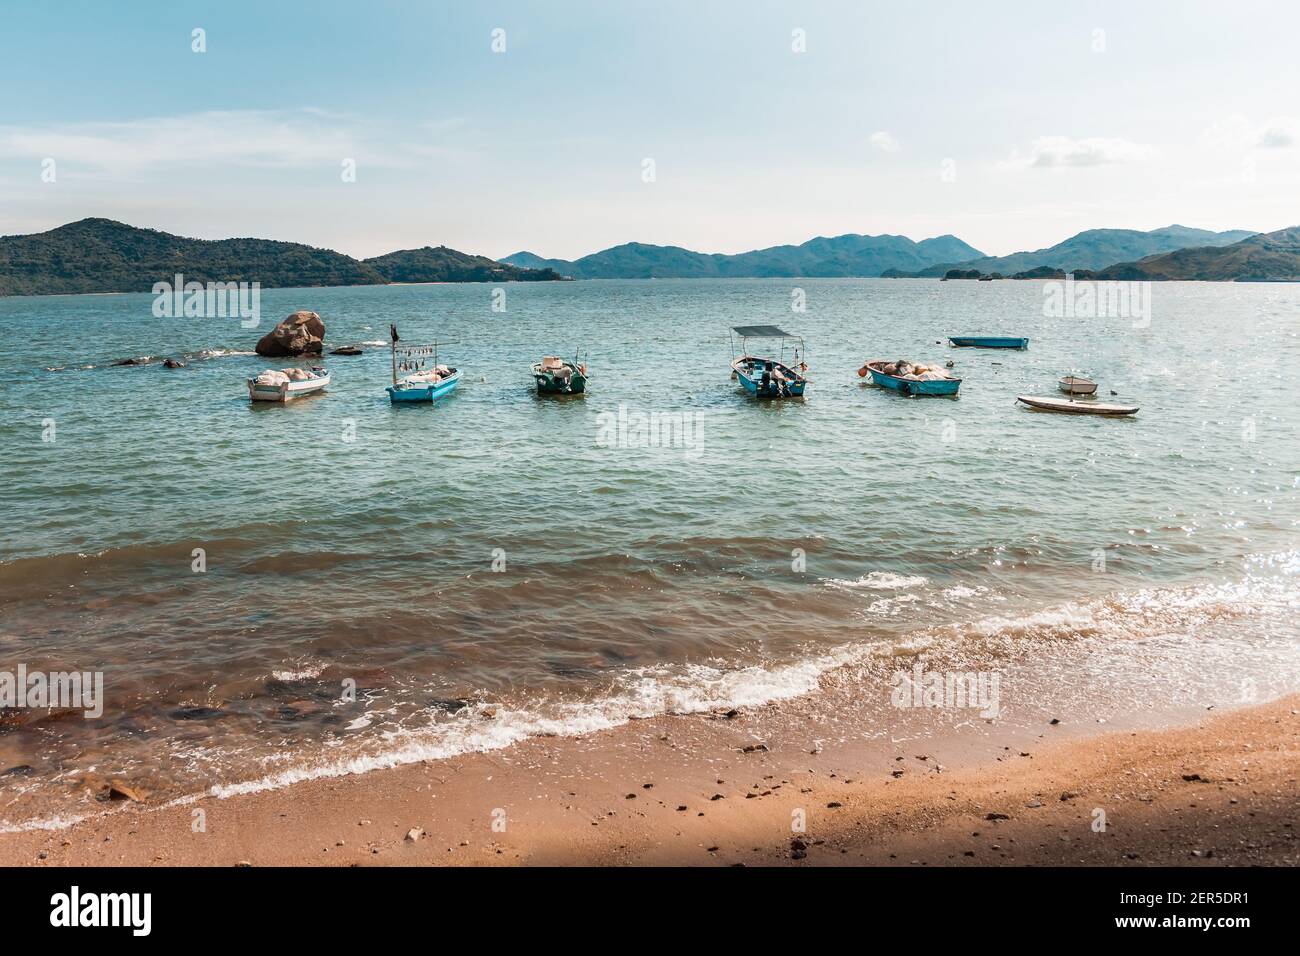 Travel Shot of Caribbean Setting of Peng Chau Island Sandy Beach with Turquoise Blue Water and Fishing Boats, Hong Kong Stock Photo